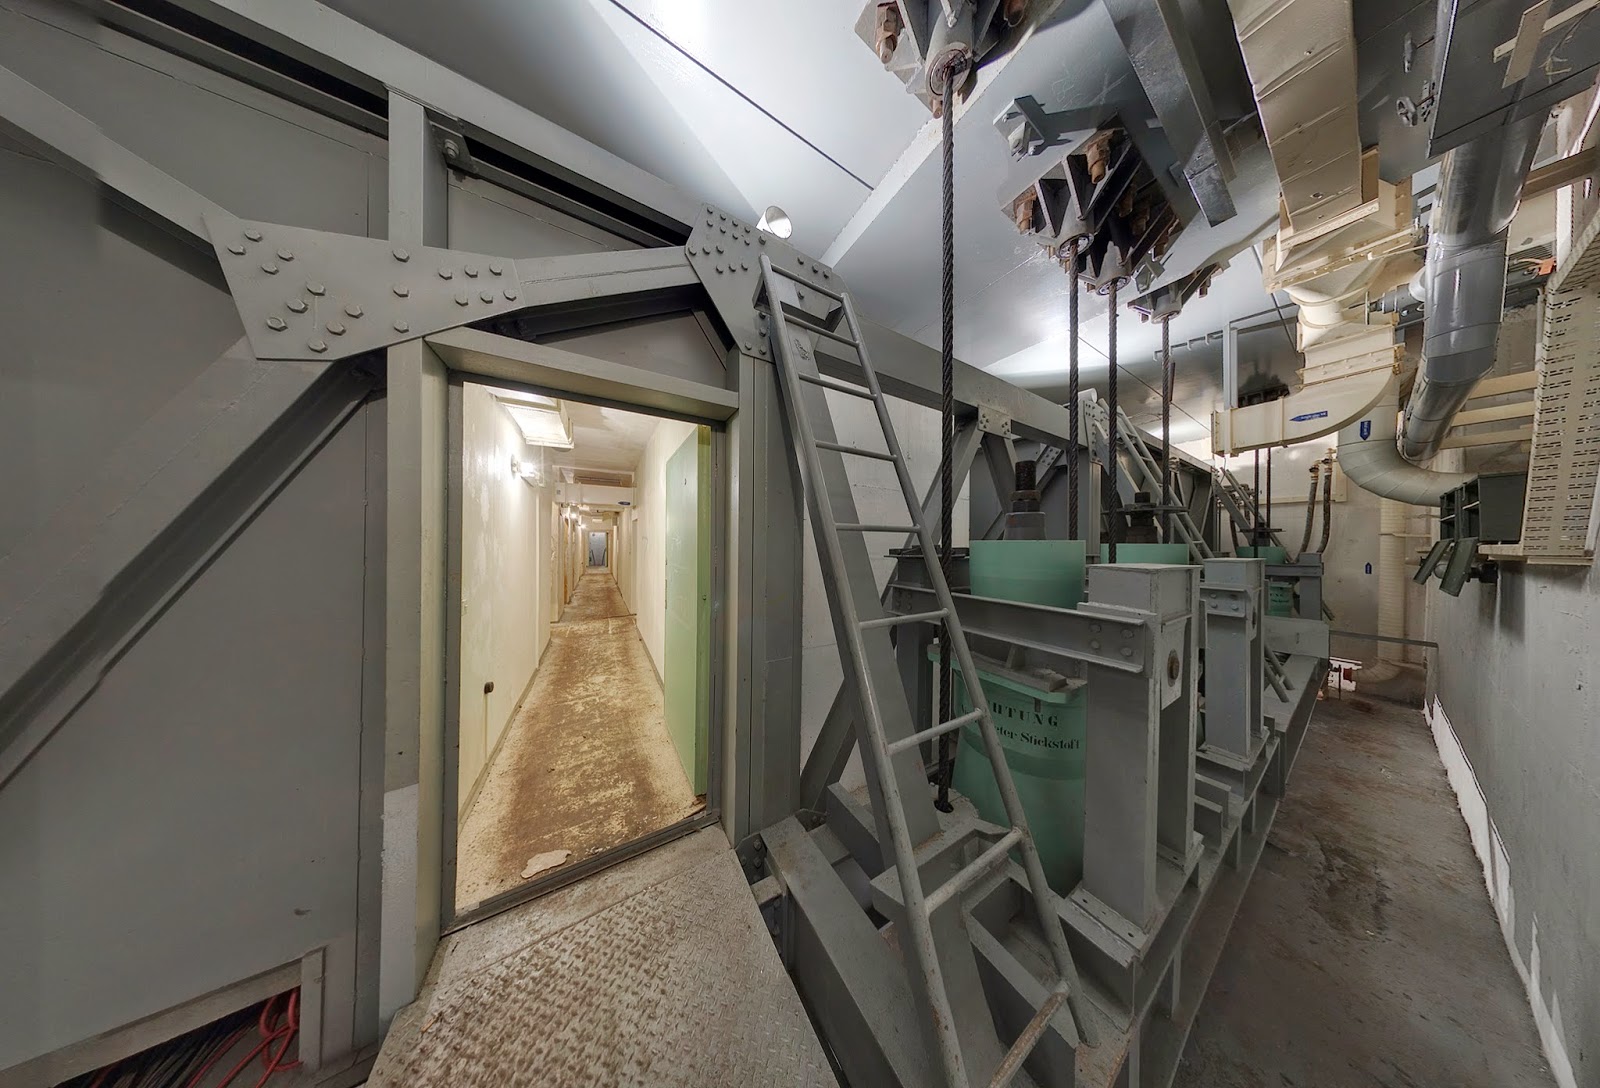 Deserted Places: Inside the Honecker nuclear bunker in Berlin